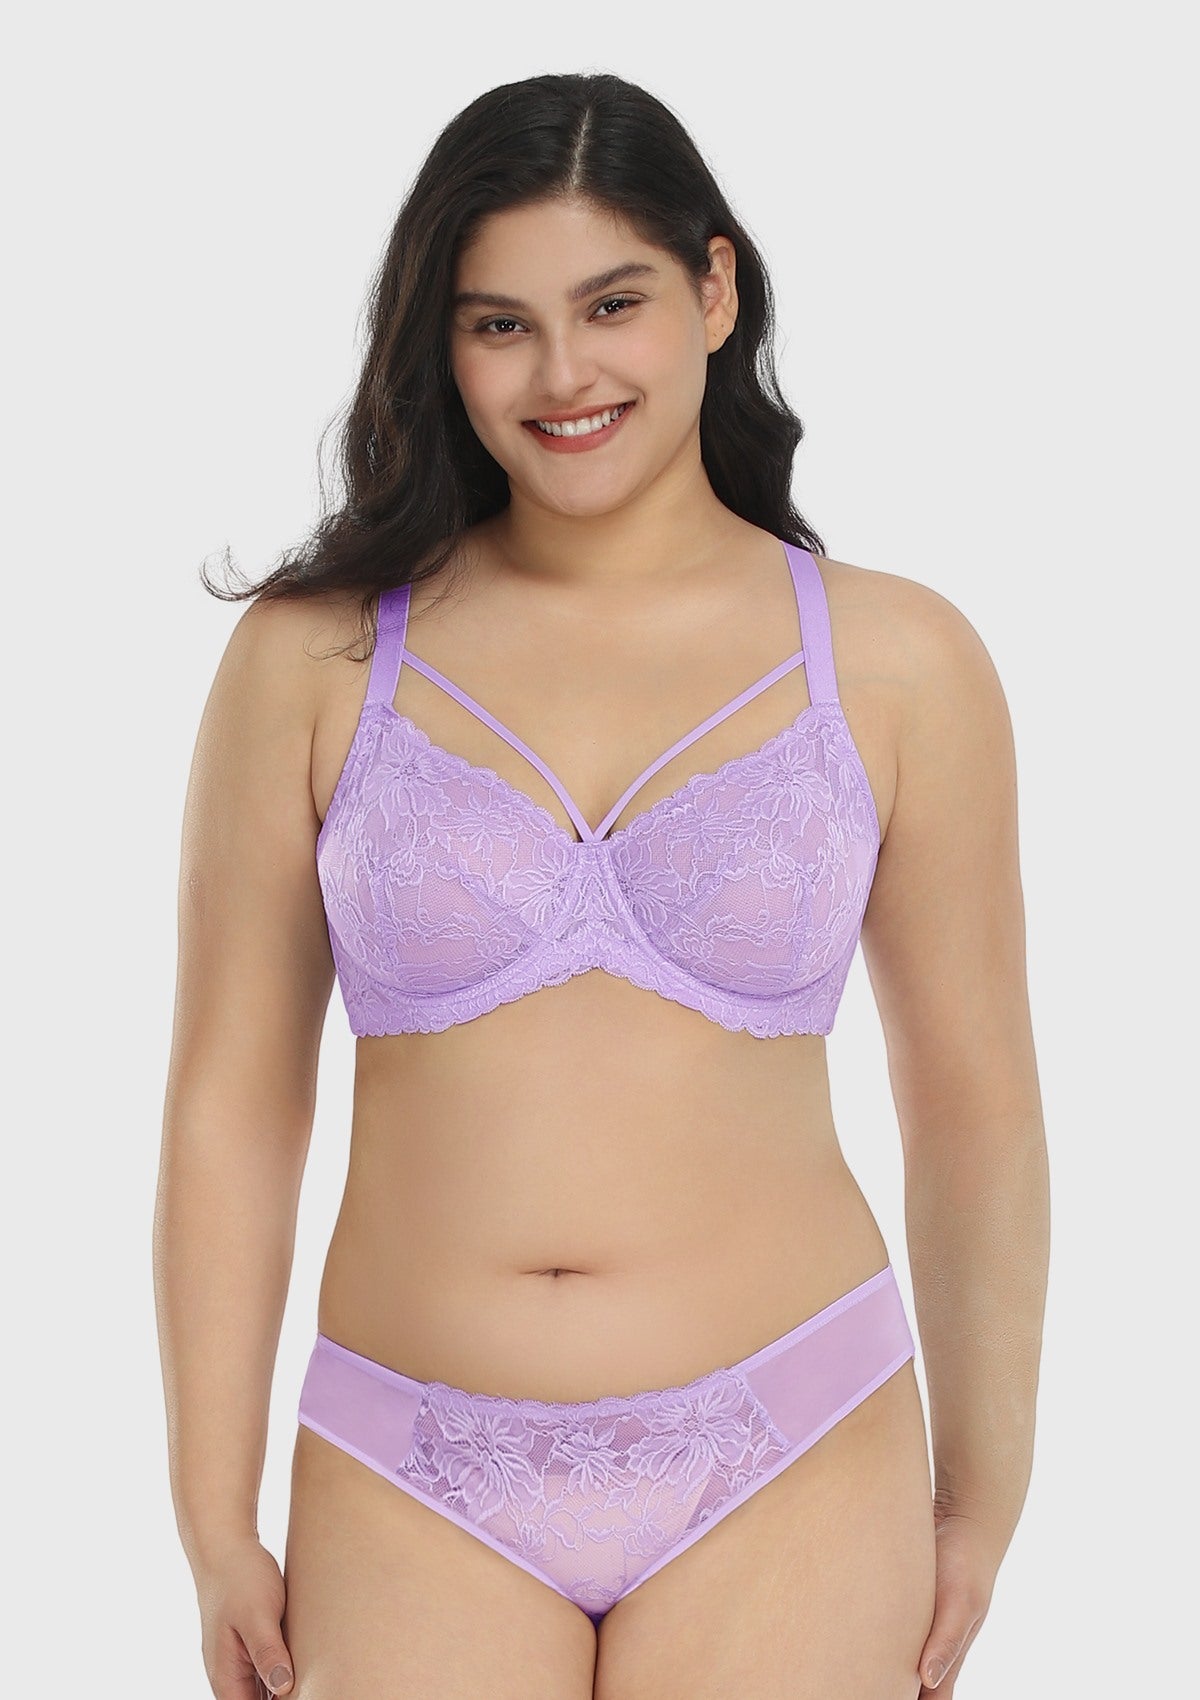 HSIA Pretty In Petals See-Through Lace Bra: Lift And Separate - Purple / 36 / D